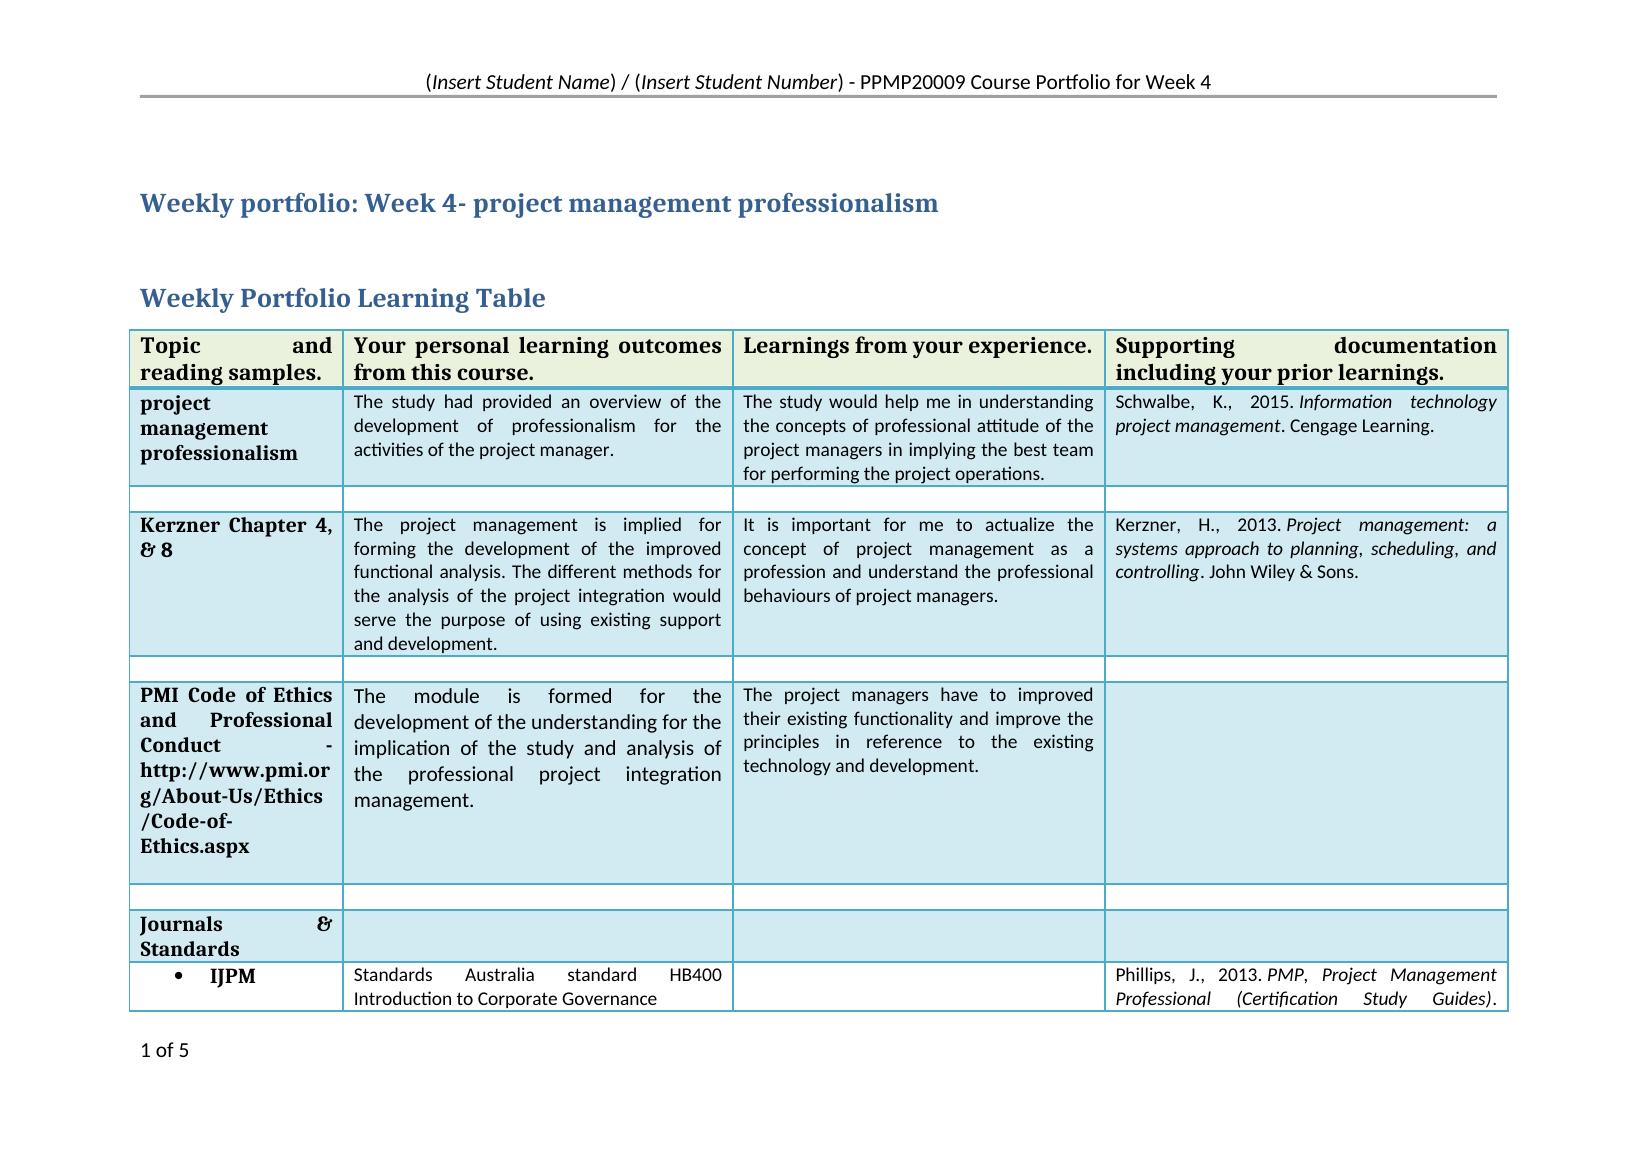 Study on Project Management Professionalism_1